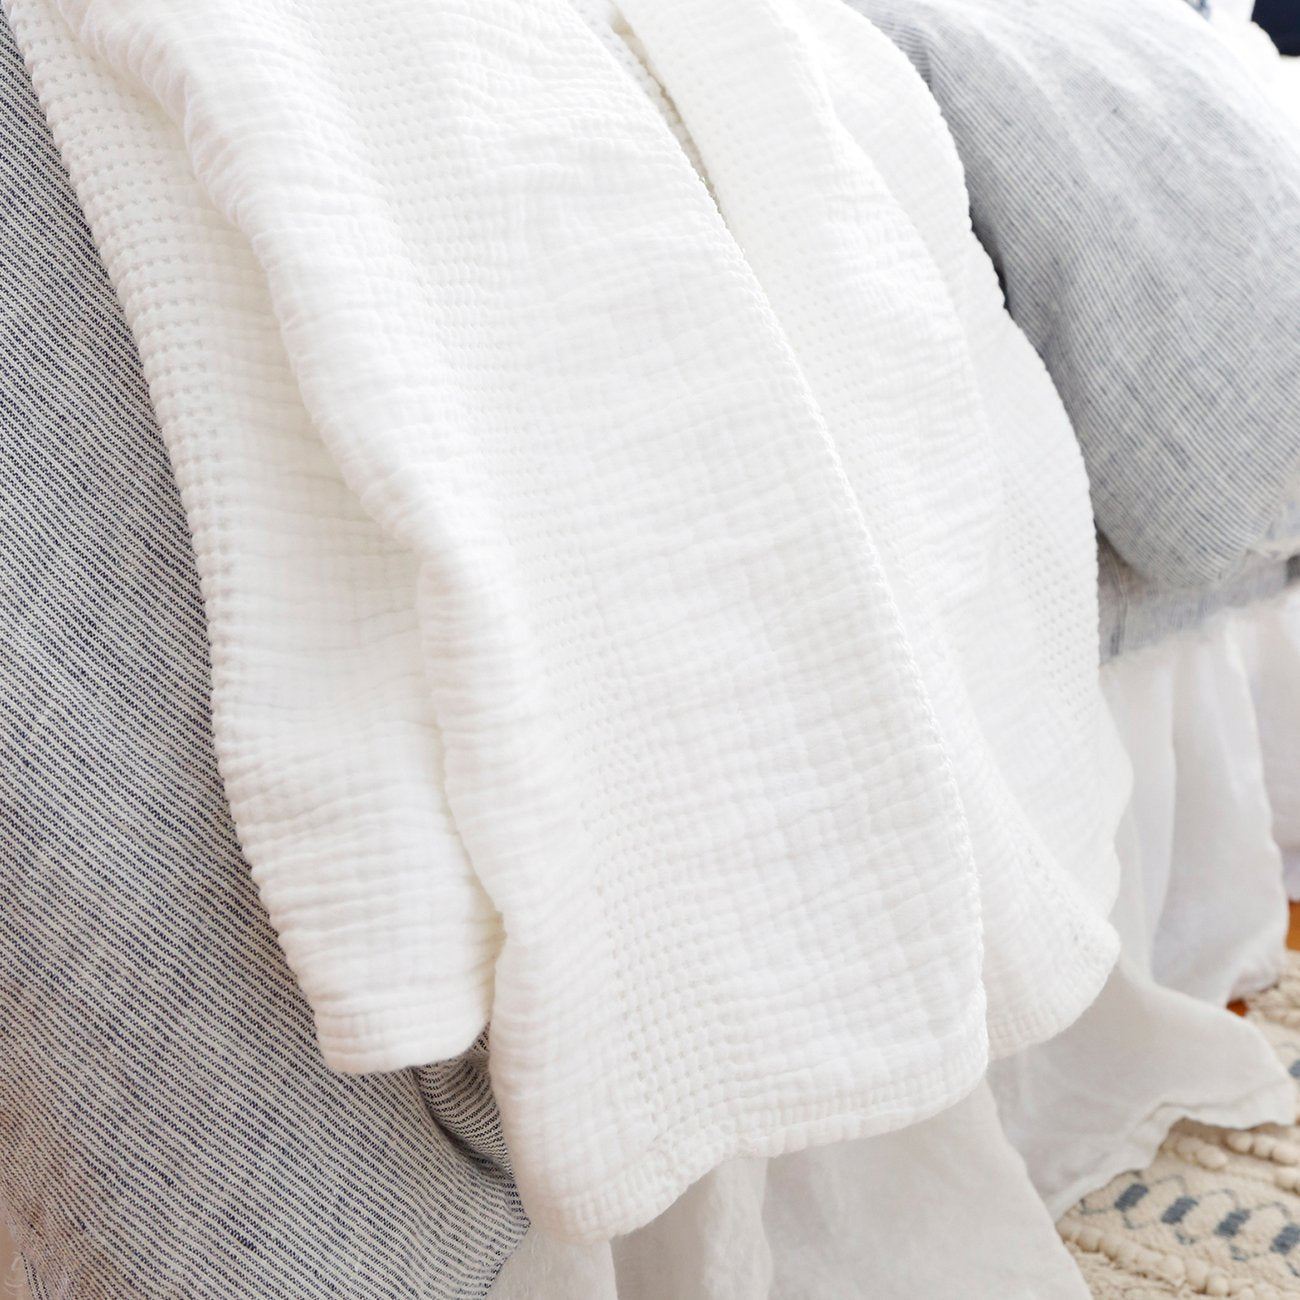 Crafted in Portugal, the Nantucket White Matelasse by Pom Pom at Home is a modern take on the matelasse with its beautiful interwoven weave. We love the soft, puckered appearance this brings to a bedroom.  Details & Care: 100% cotton. Machine wash cold; tumble dry low; warm iron as needed. Do not bleach